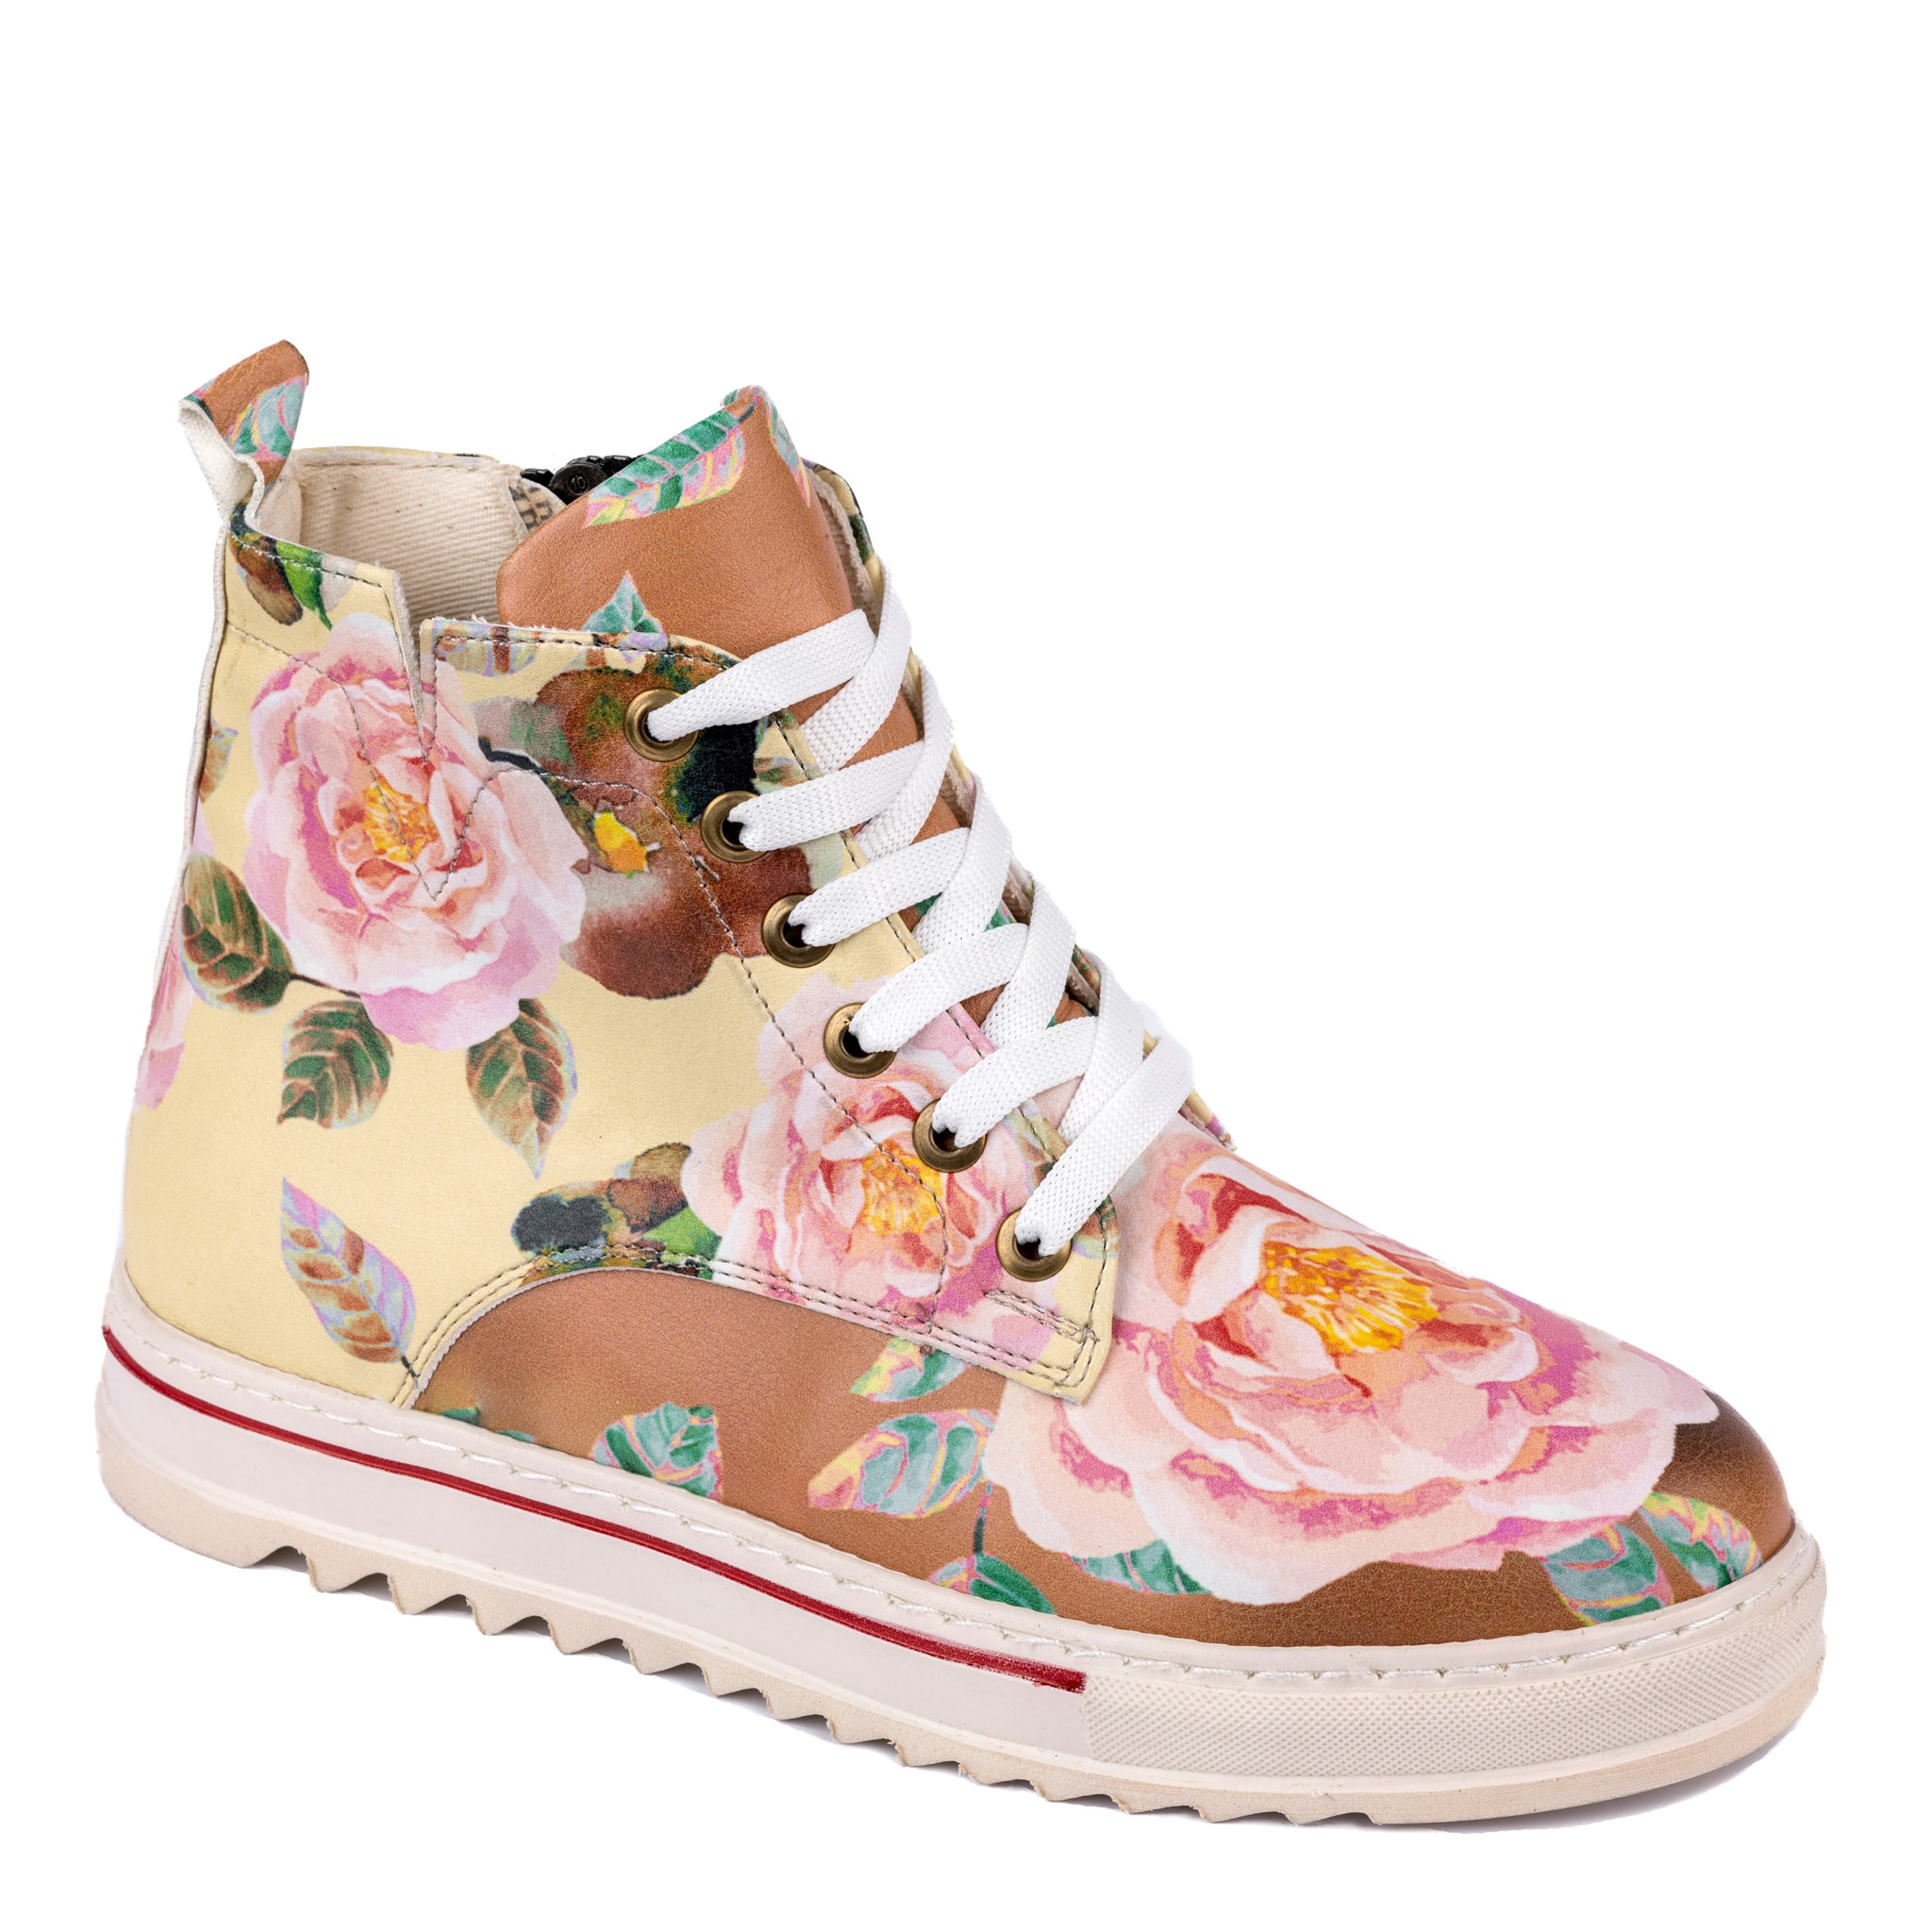 SHOES WITH FLOWER PRINT - YELLOW